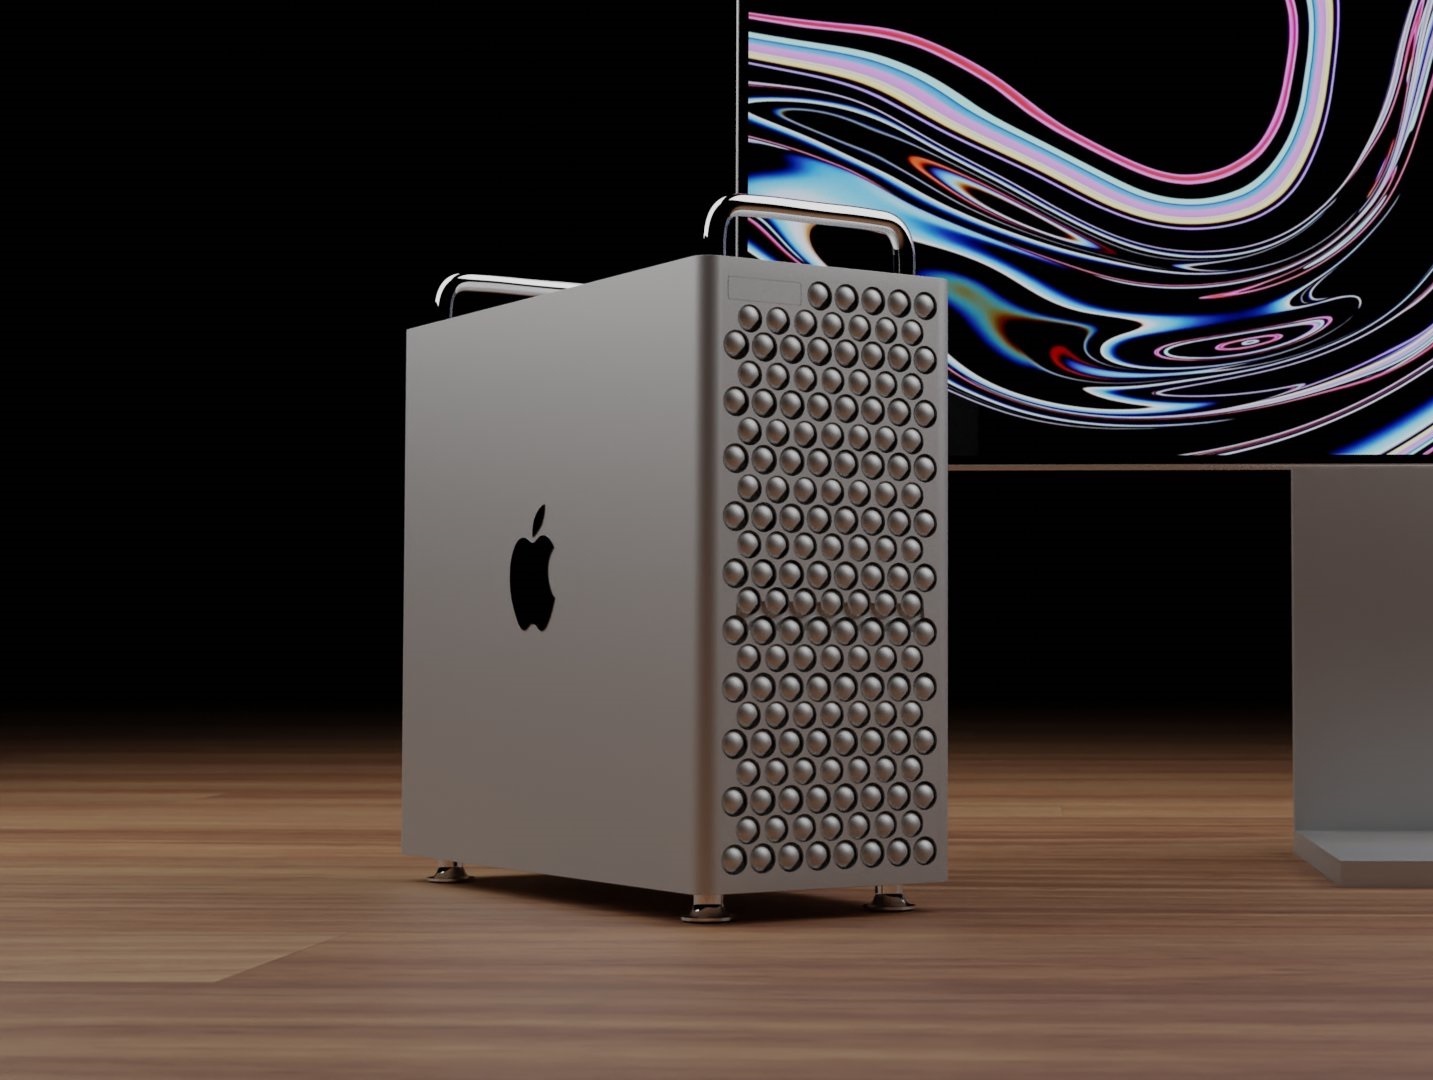 patrón Skalk Simetría Apple's new Mac Pro may be equipped with Intel's latest Ice Lake Xeon  W-3300 CPUs - NotebookCheck.net News